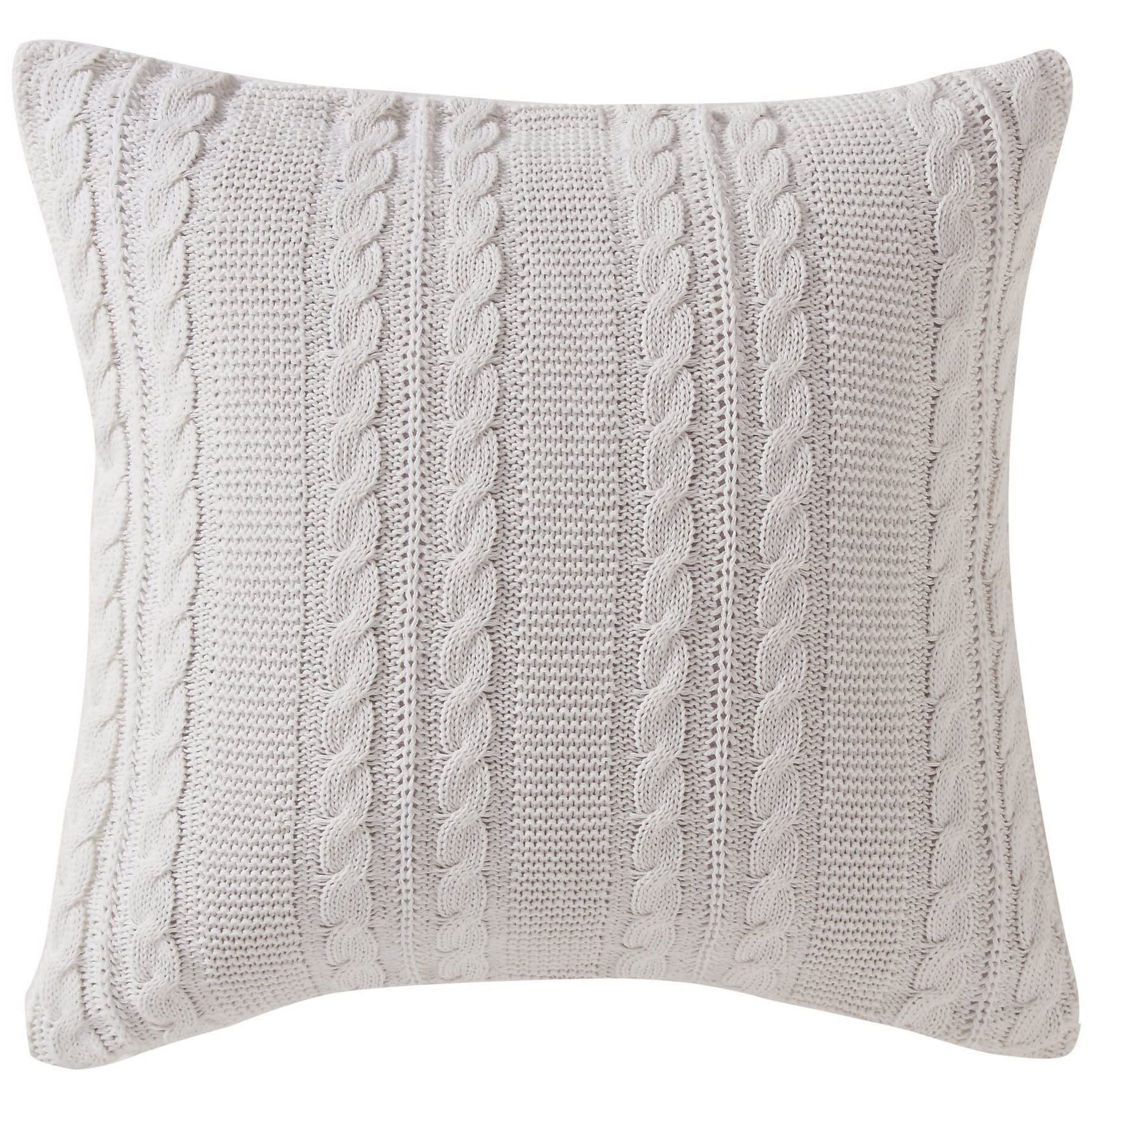 VCNY Home Dublin Cable Knit Decorative Pillow - Image 2 of 4